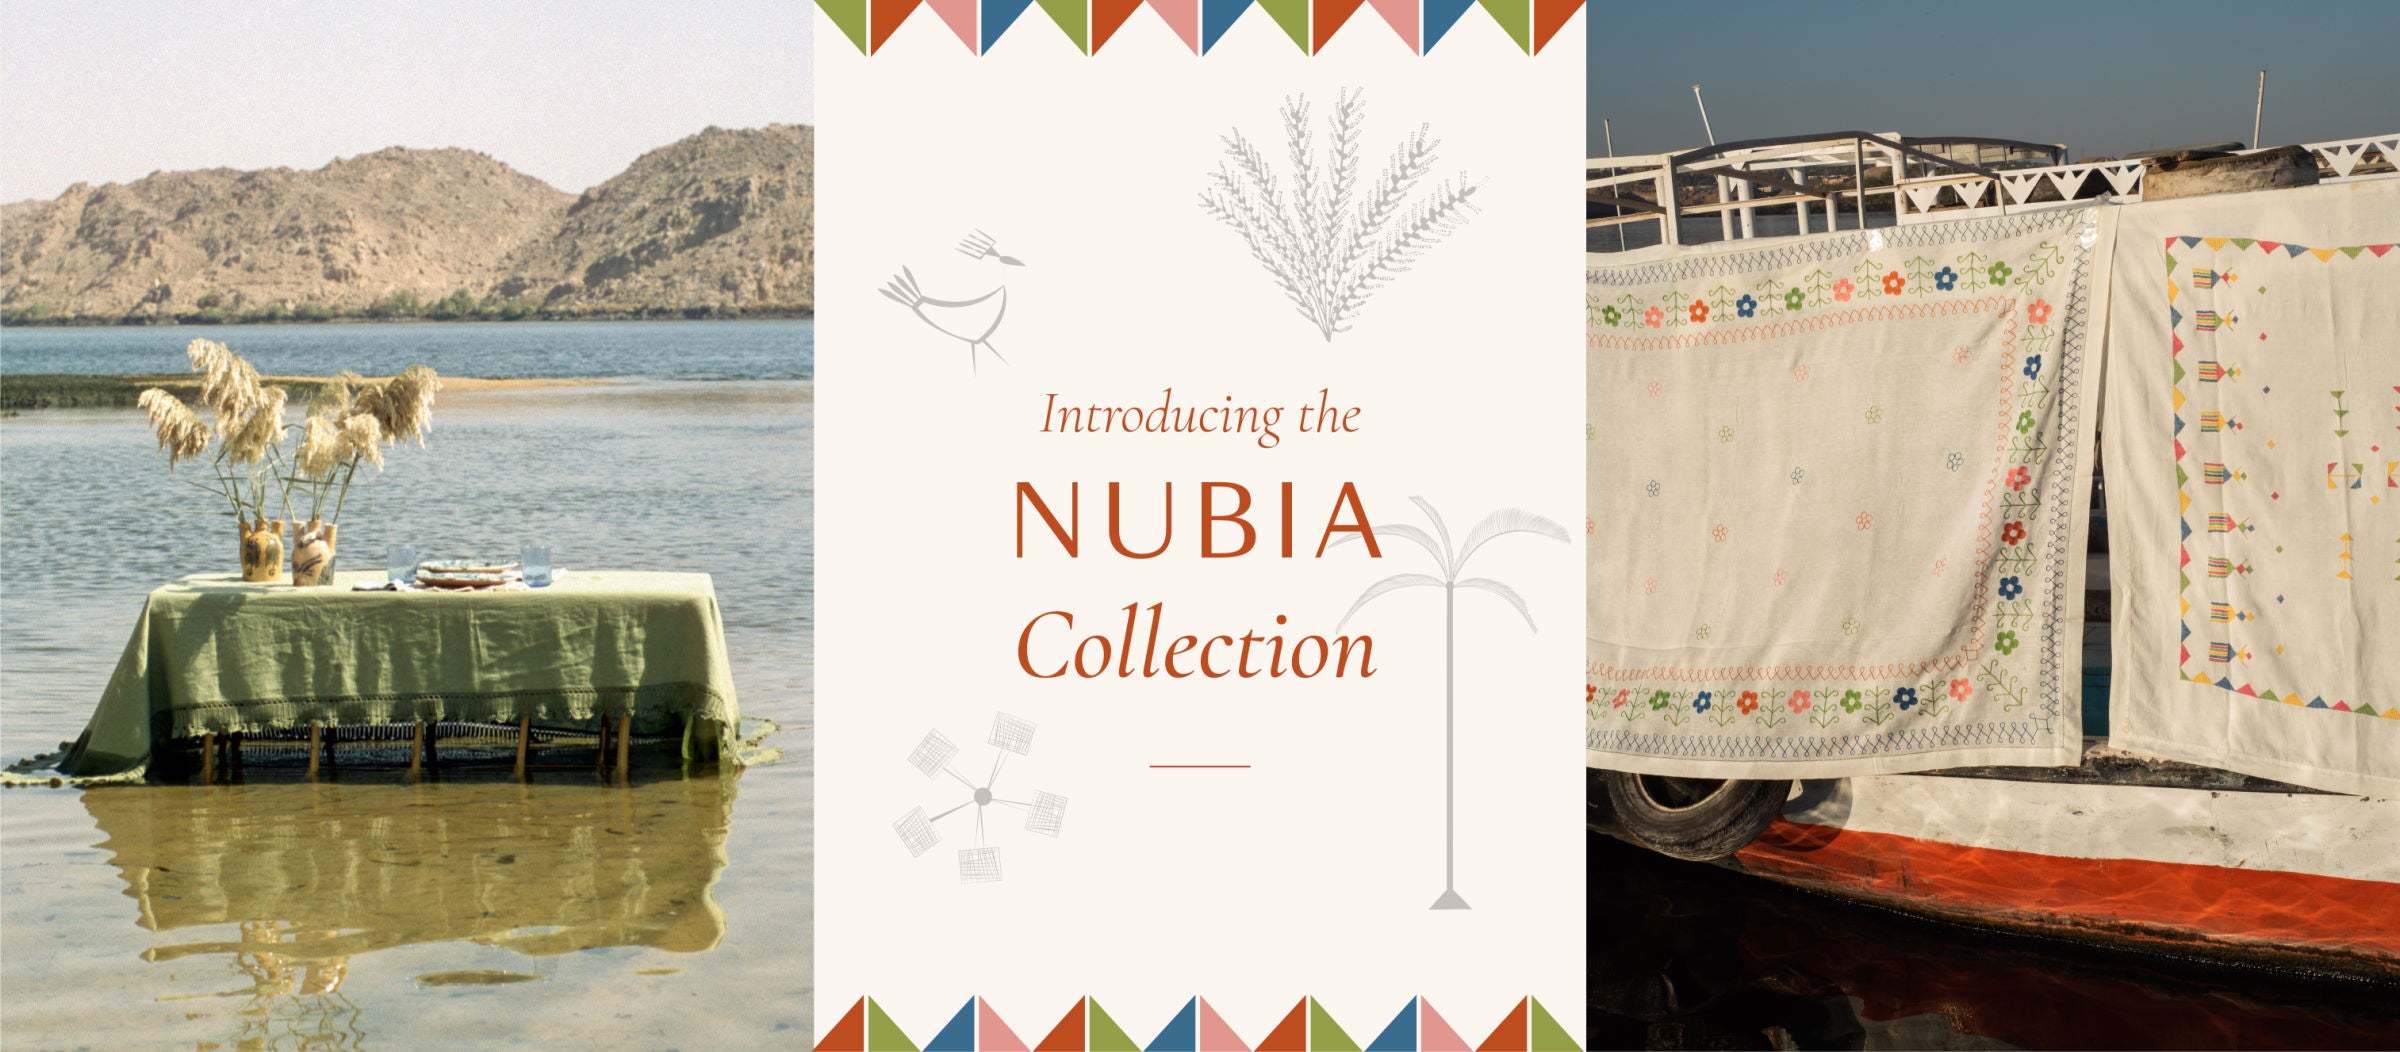 NUBIA COLLECTION